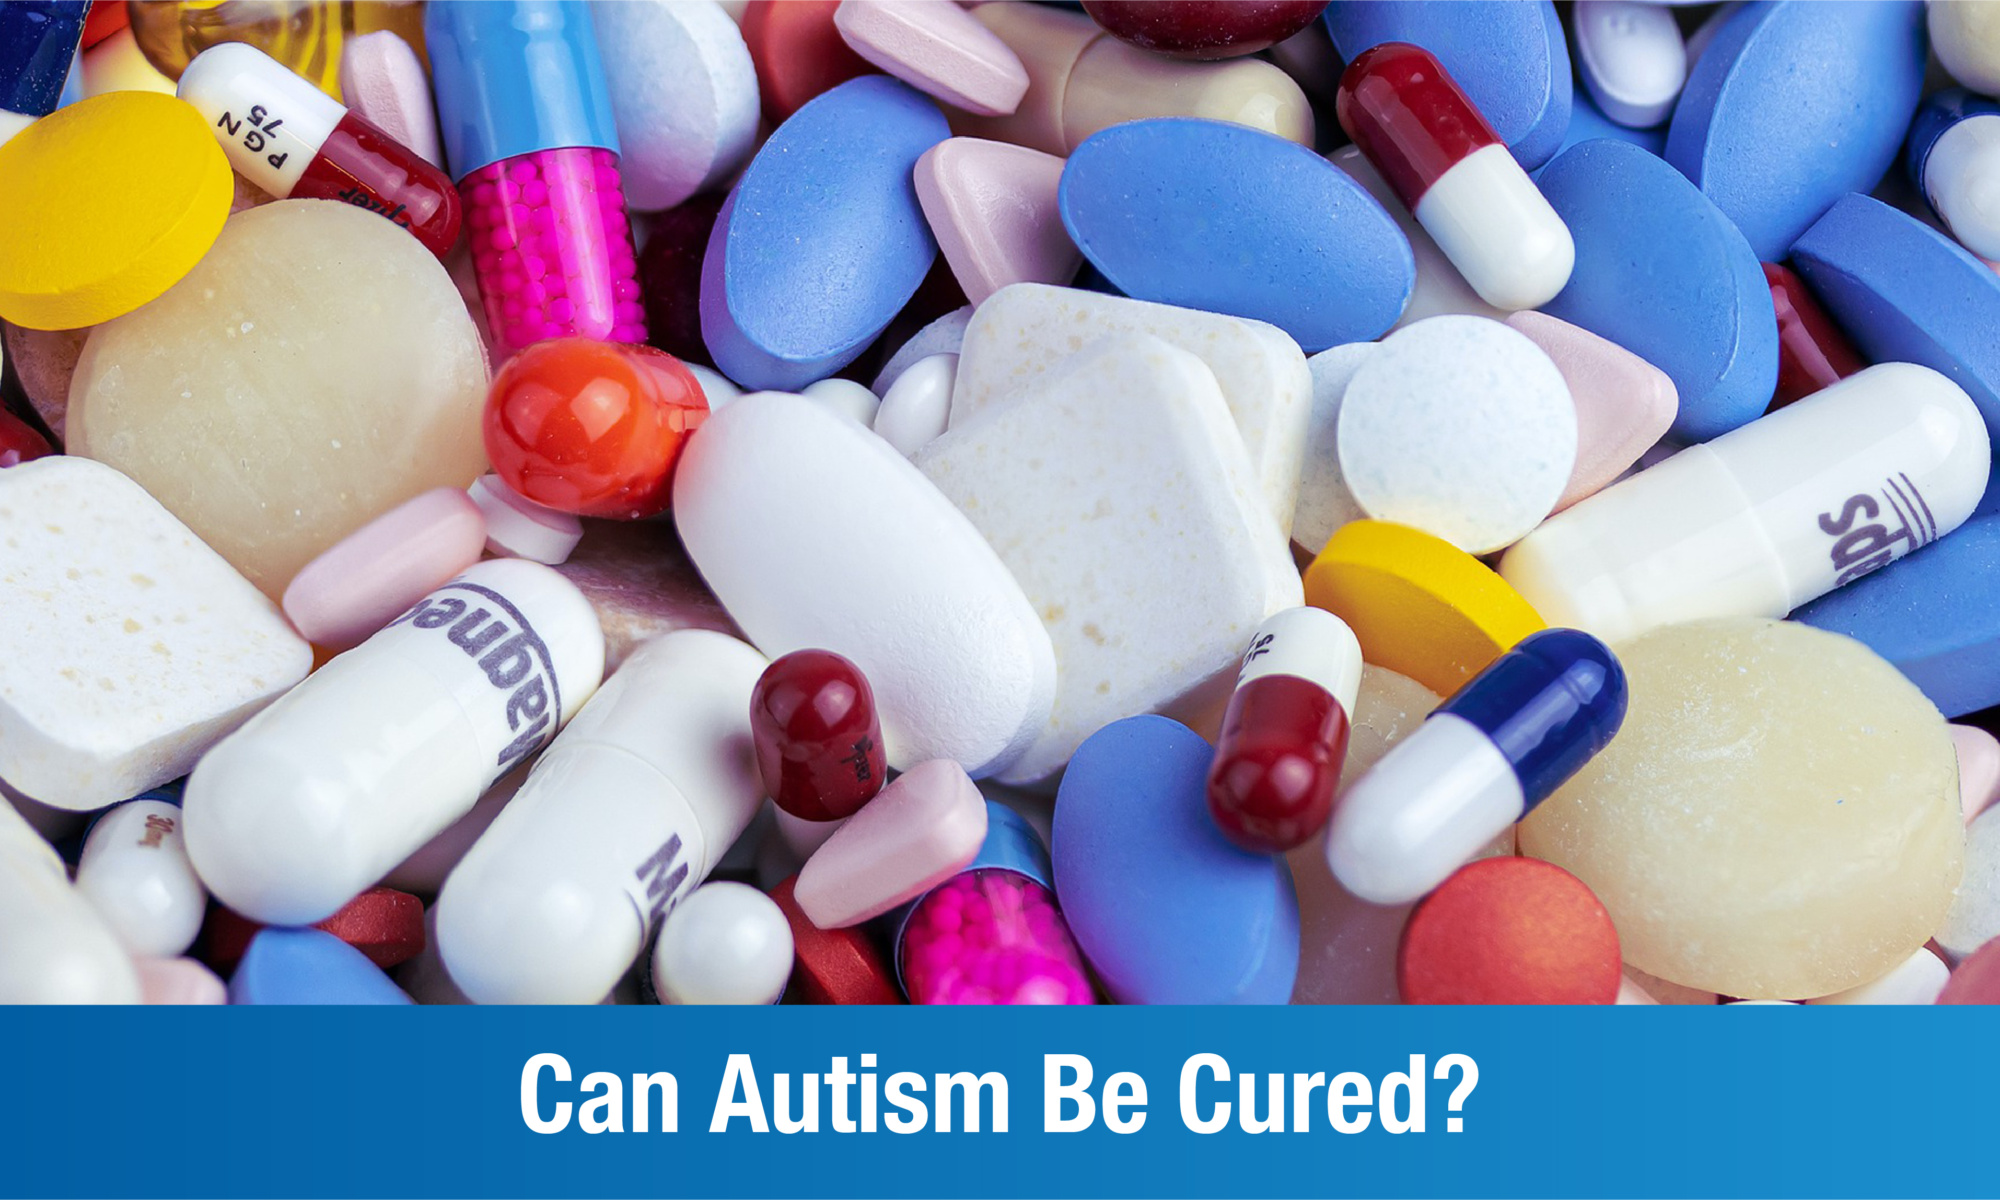 How To Cure Autism: A Guide on Treatment options for Autism | Plexus